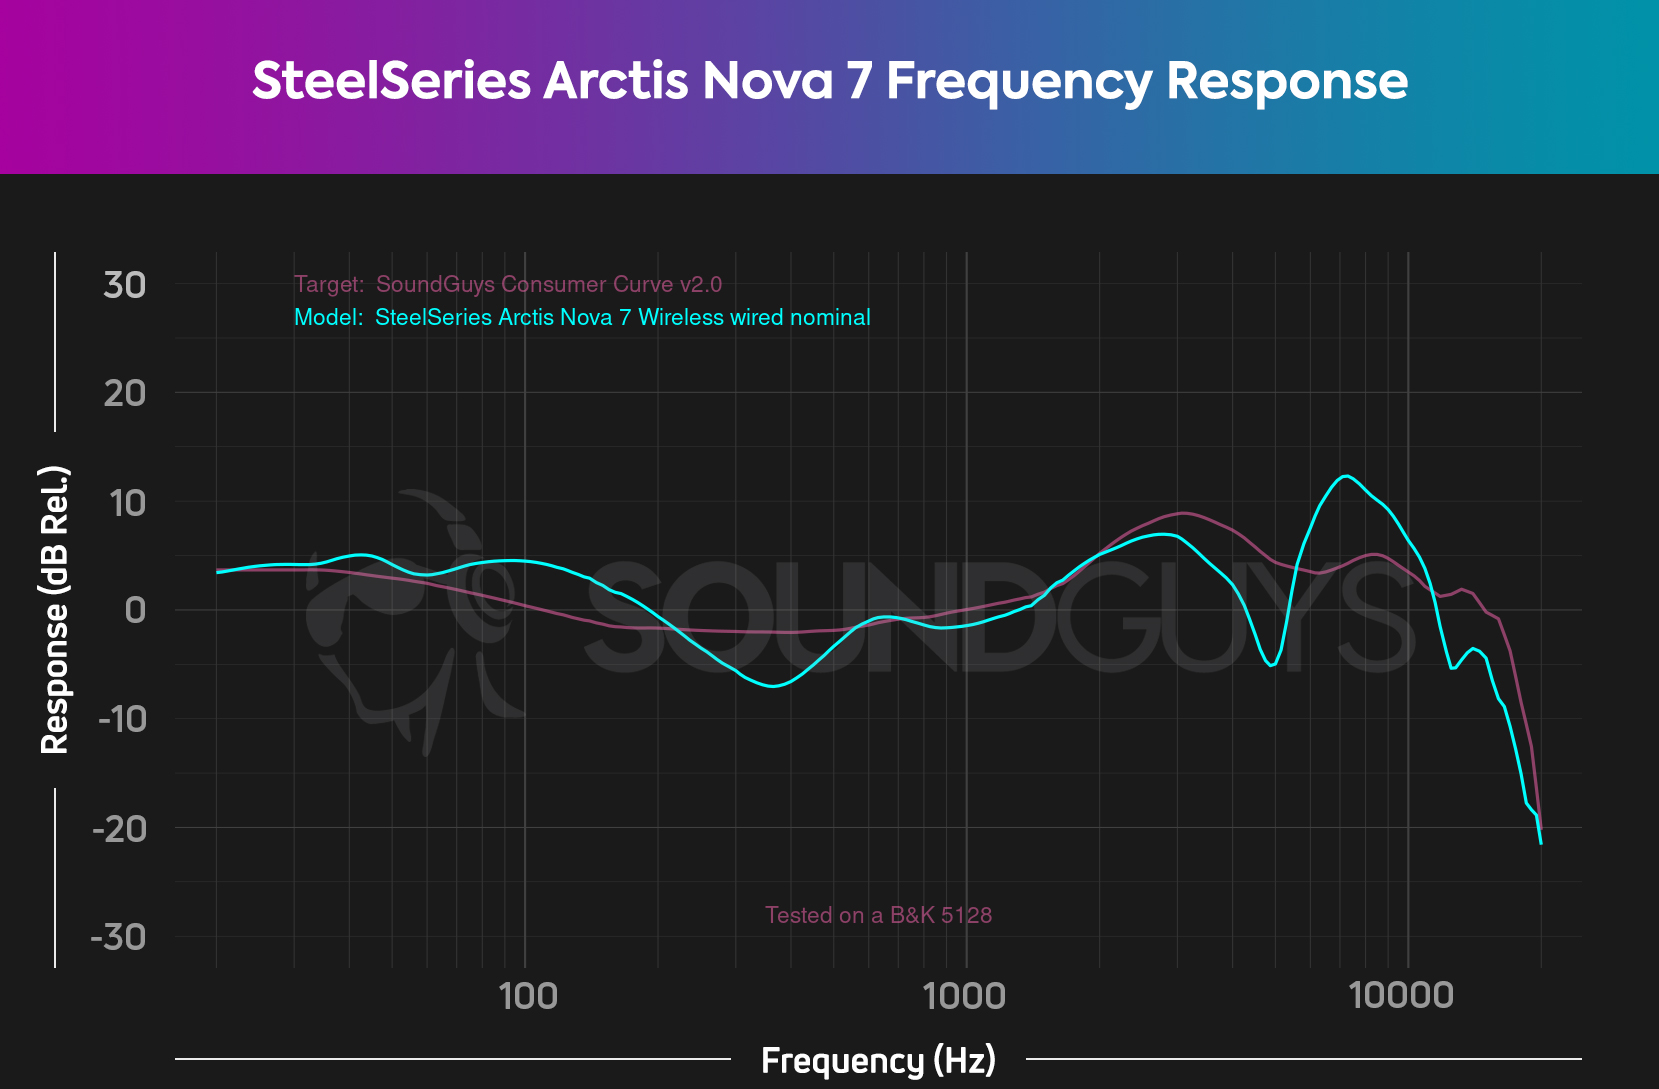 A frequency response chart for the SteelSeries Arctis Nova 7, which shows some strange over-emphasis in the high range.